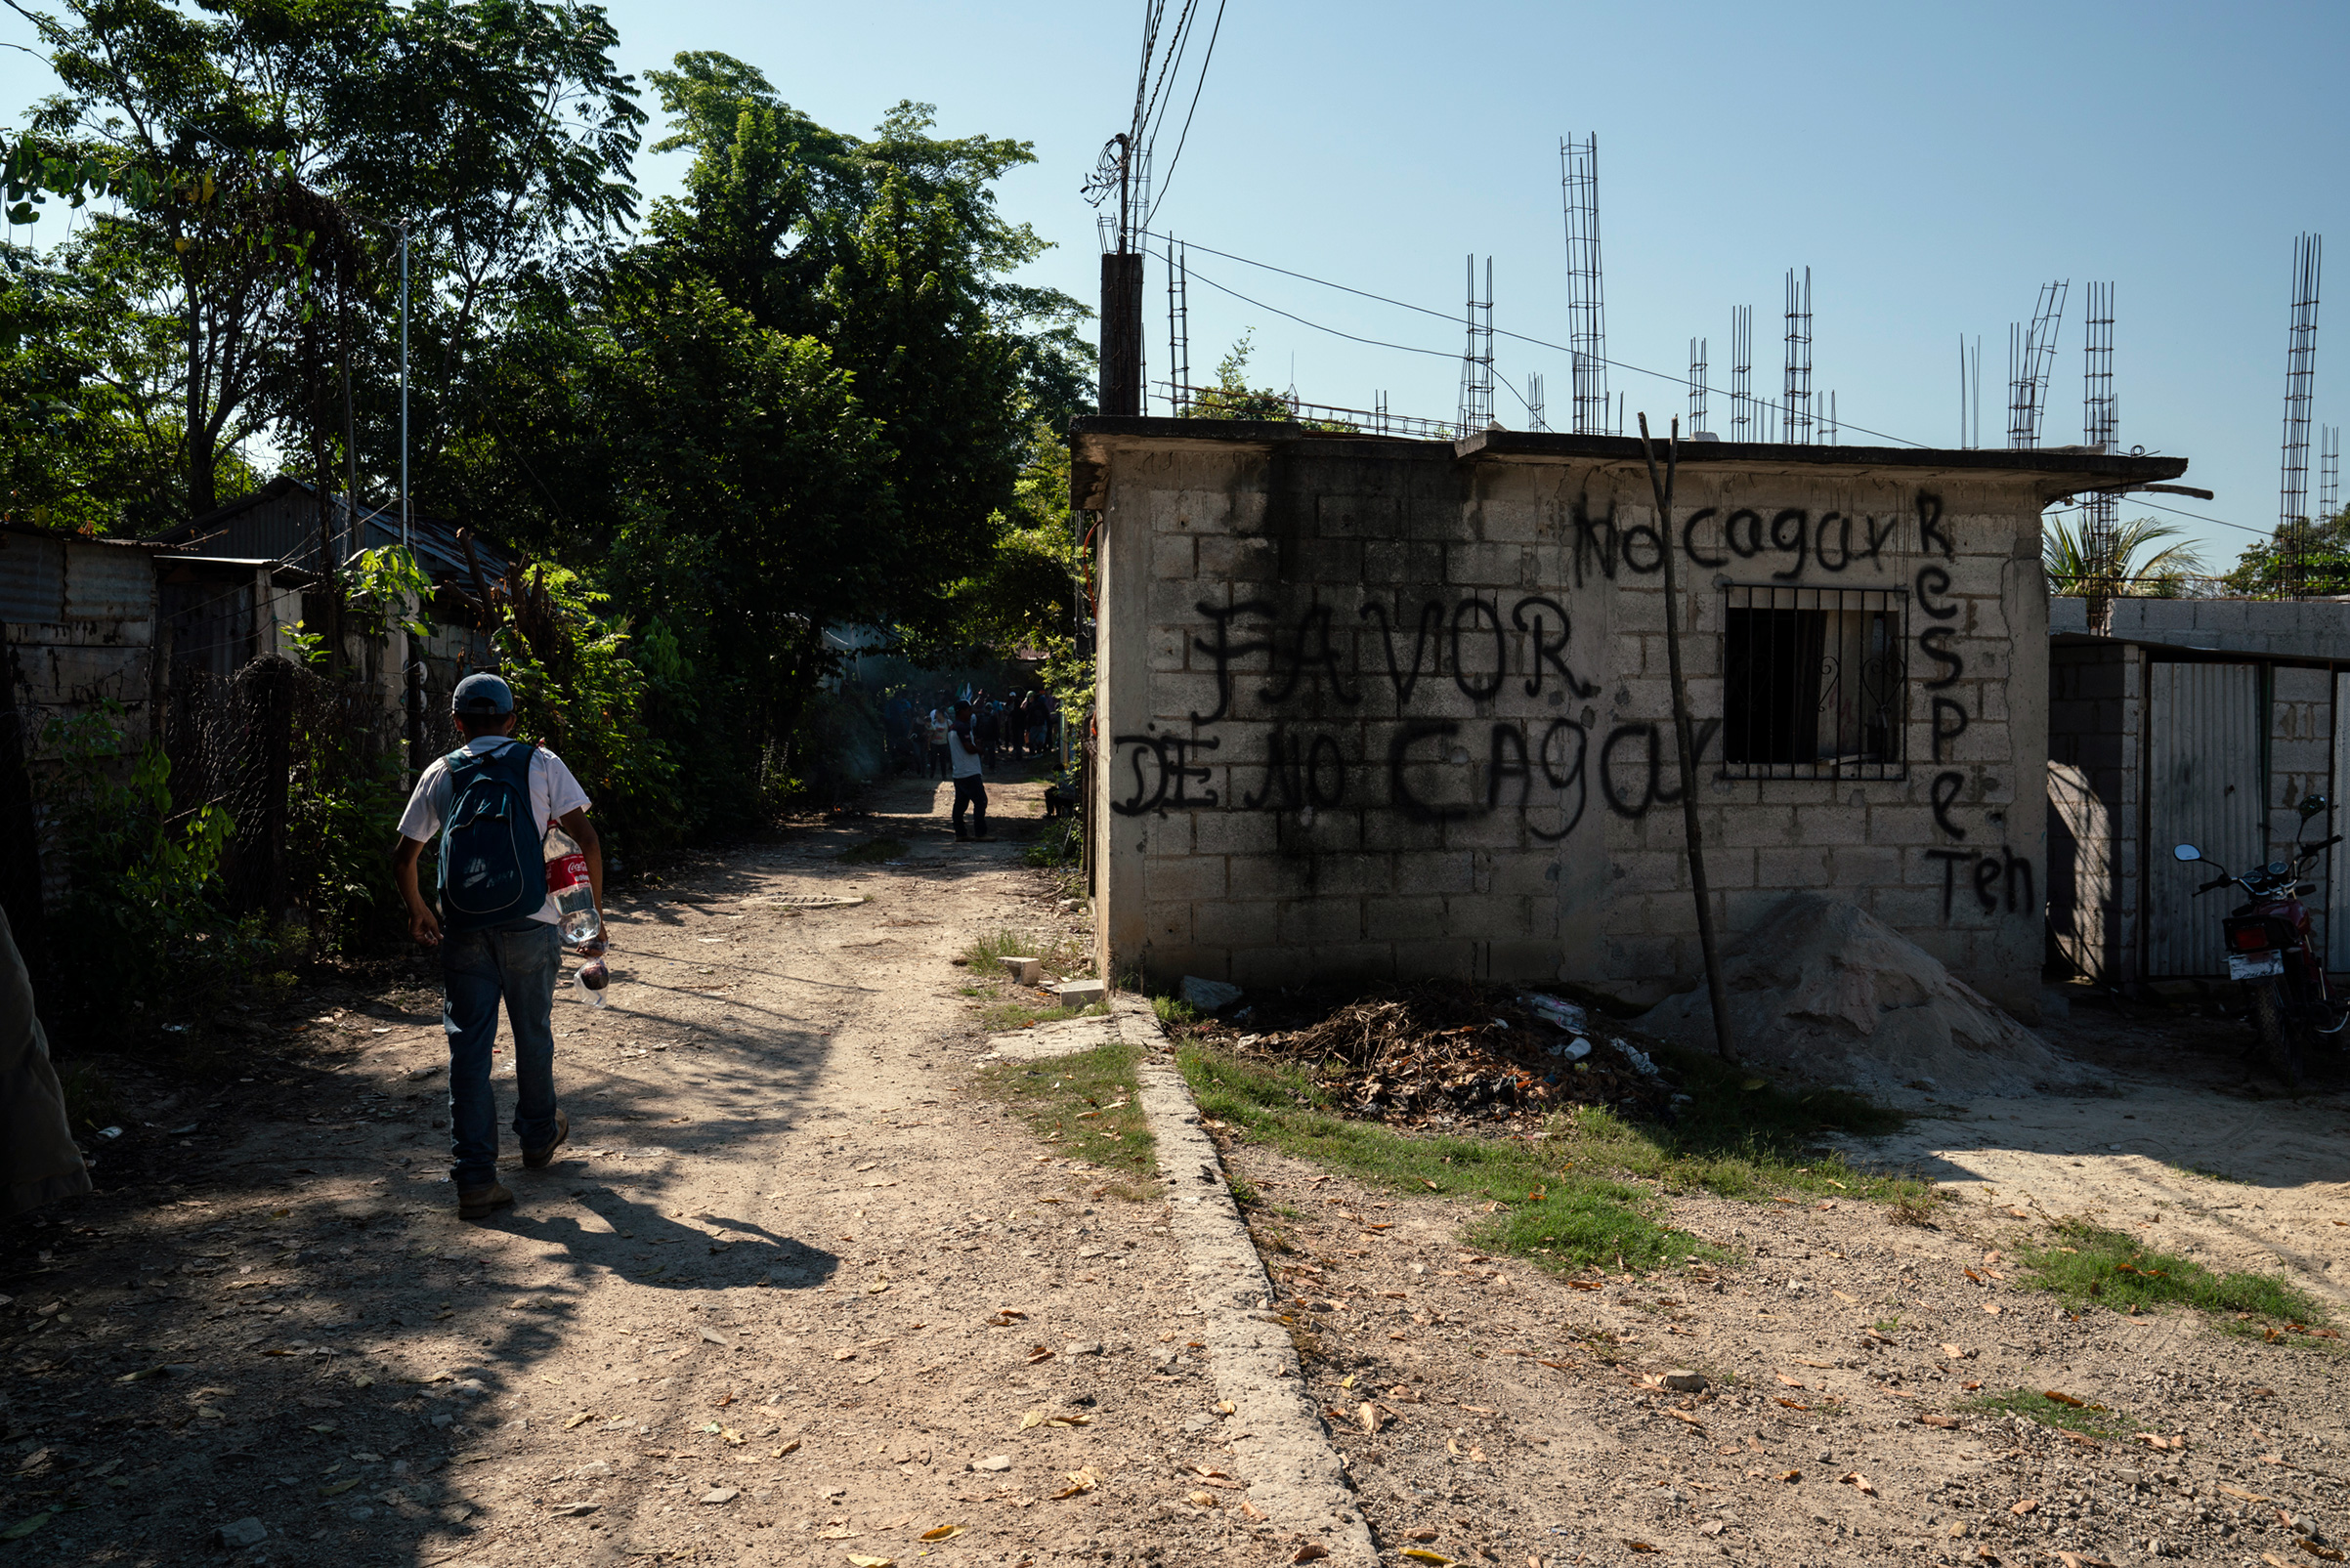 Migrants walk towards the train station near Palenque, Chiapas, on Oct. 26. The graffiti reads, “Please do not sh-t here. Be respectful.” (Veronica G. Cardenas for TIME)